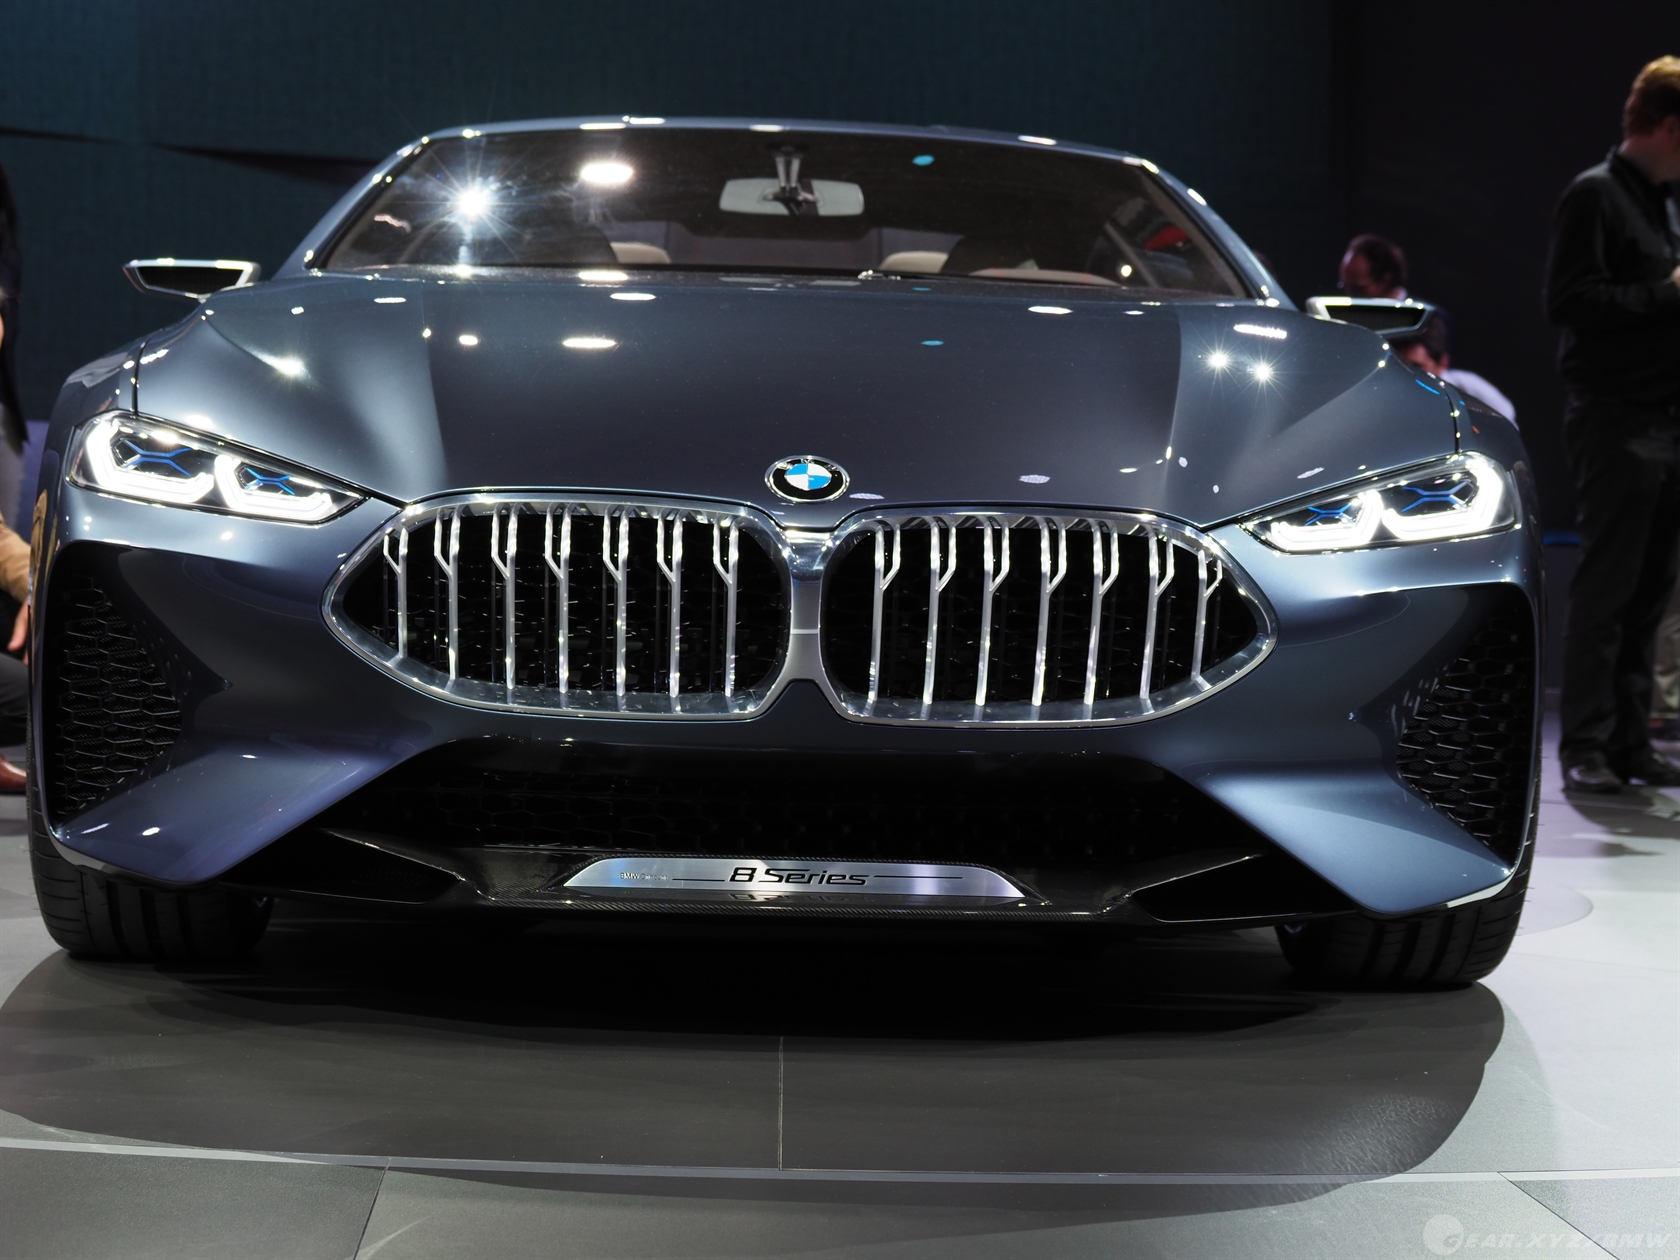 The Ultimate Luxury: The 2017 BMW 8 Series Concept